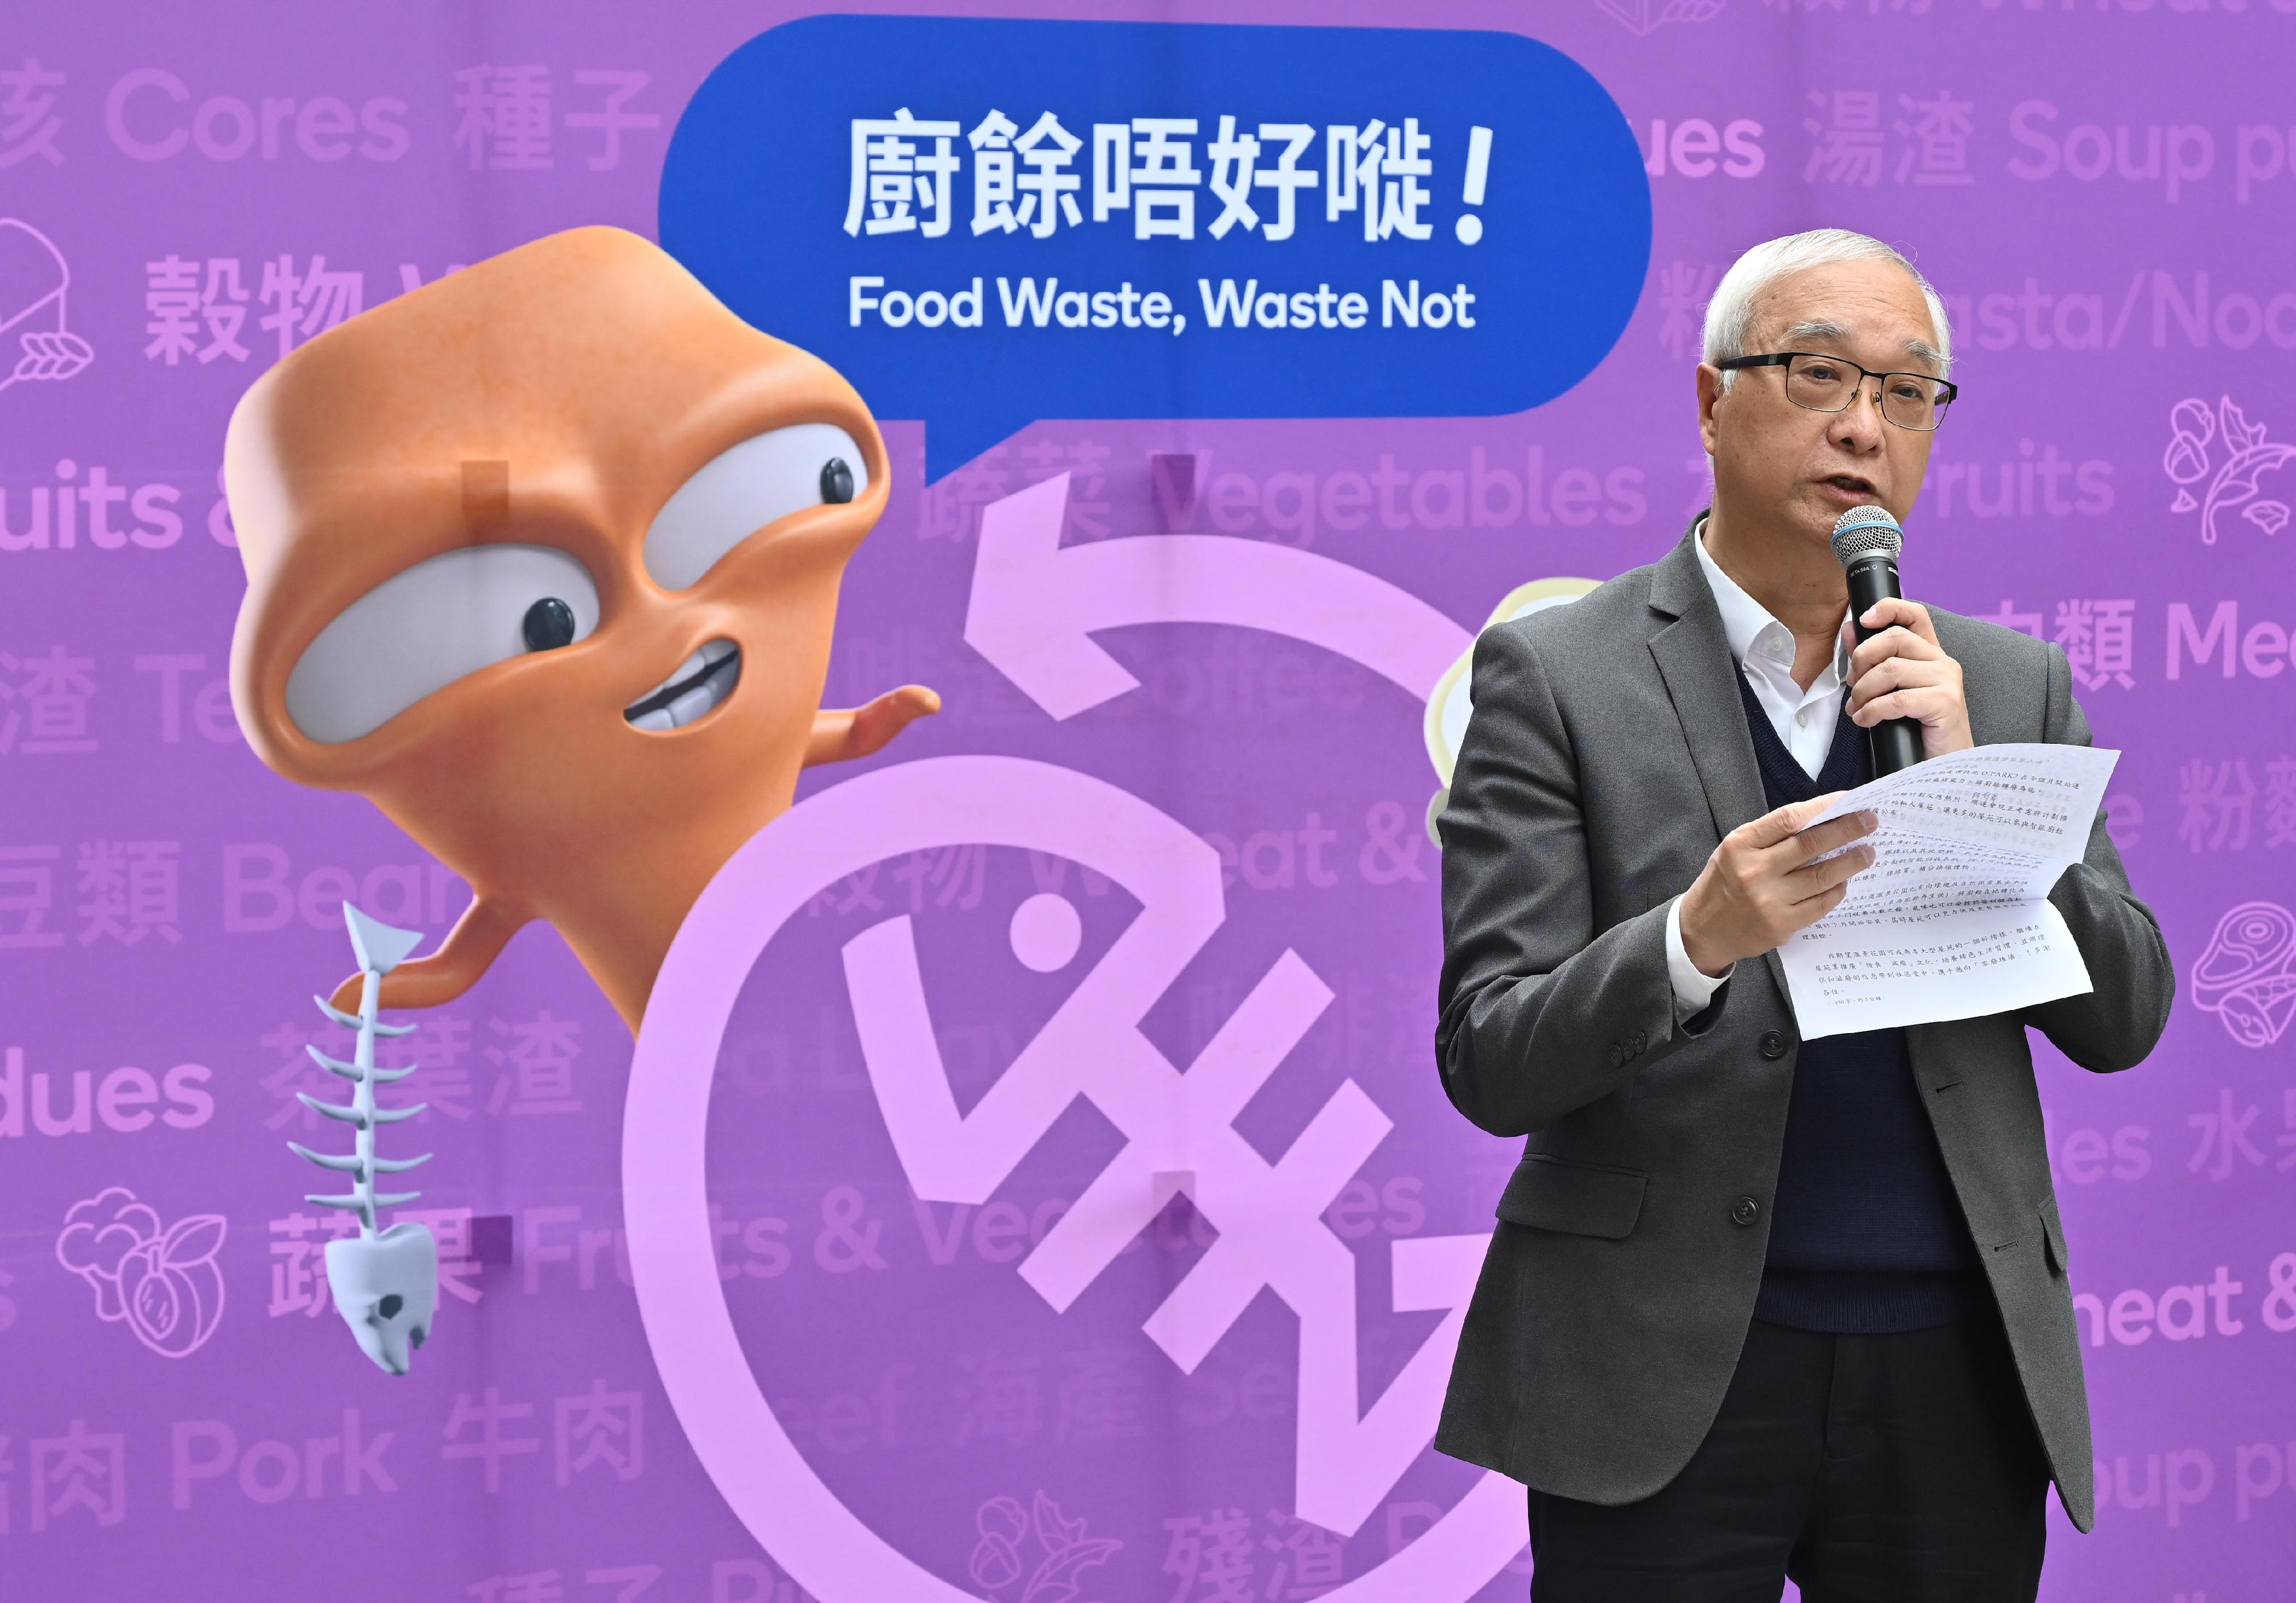 The Secretary for Environment and Ecology, Mr Tse Chin-wan, attended the launch ceremony of the Pilot Scheme on Food Waste Smart Recycling Bins in Private Housing Estates at Sceneway Garden in Lam Tin today (March 14), witnessing the introduction of the first batch of food waste smart recycling bins into large-scale private housing estates. Photo shows Mr Tse addressing the launch ceremony.